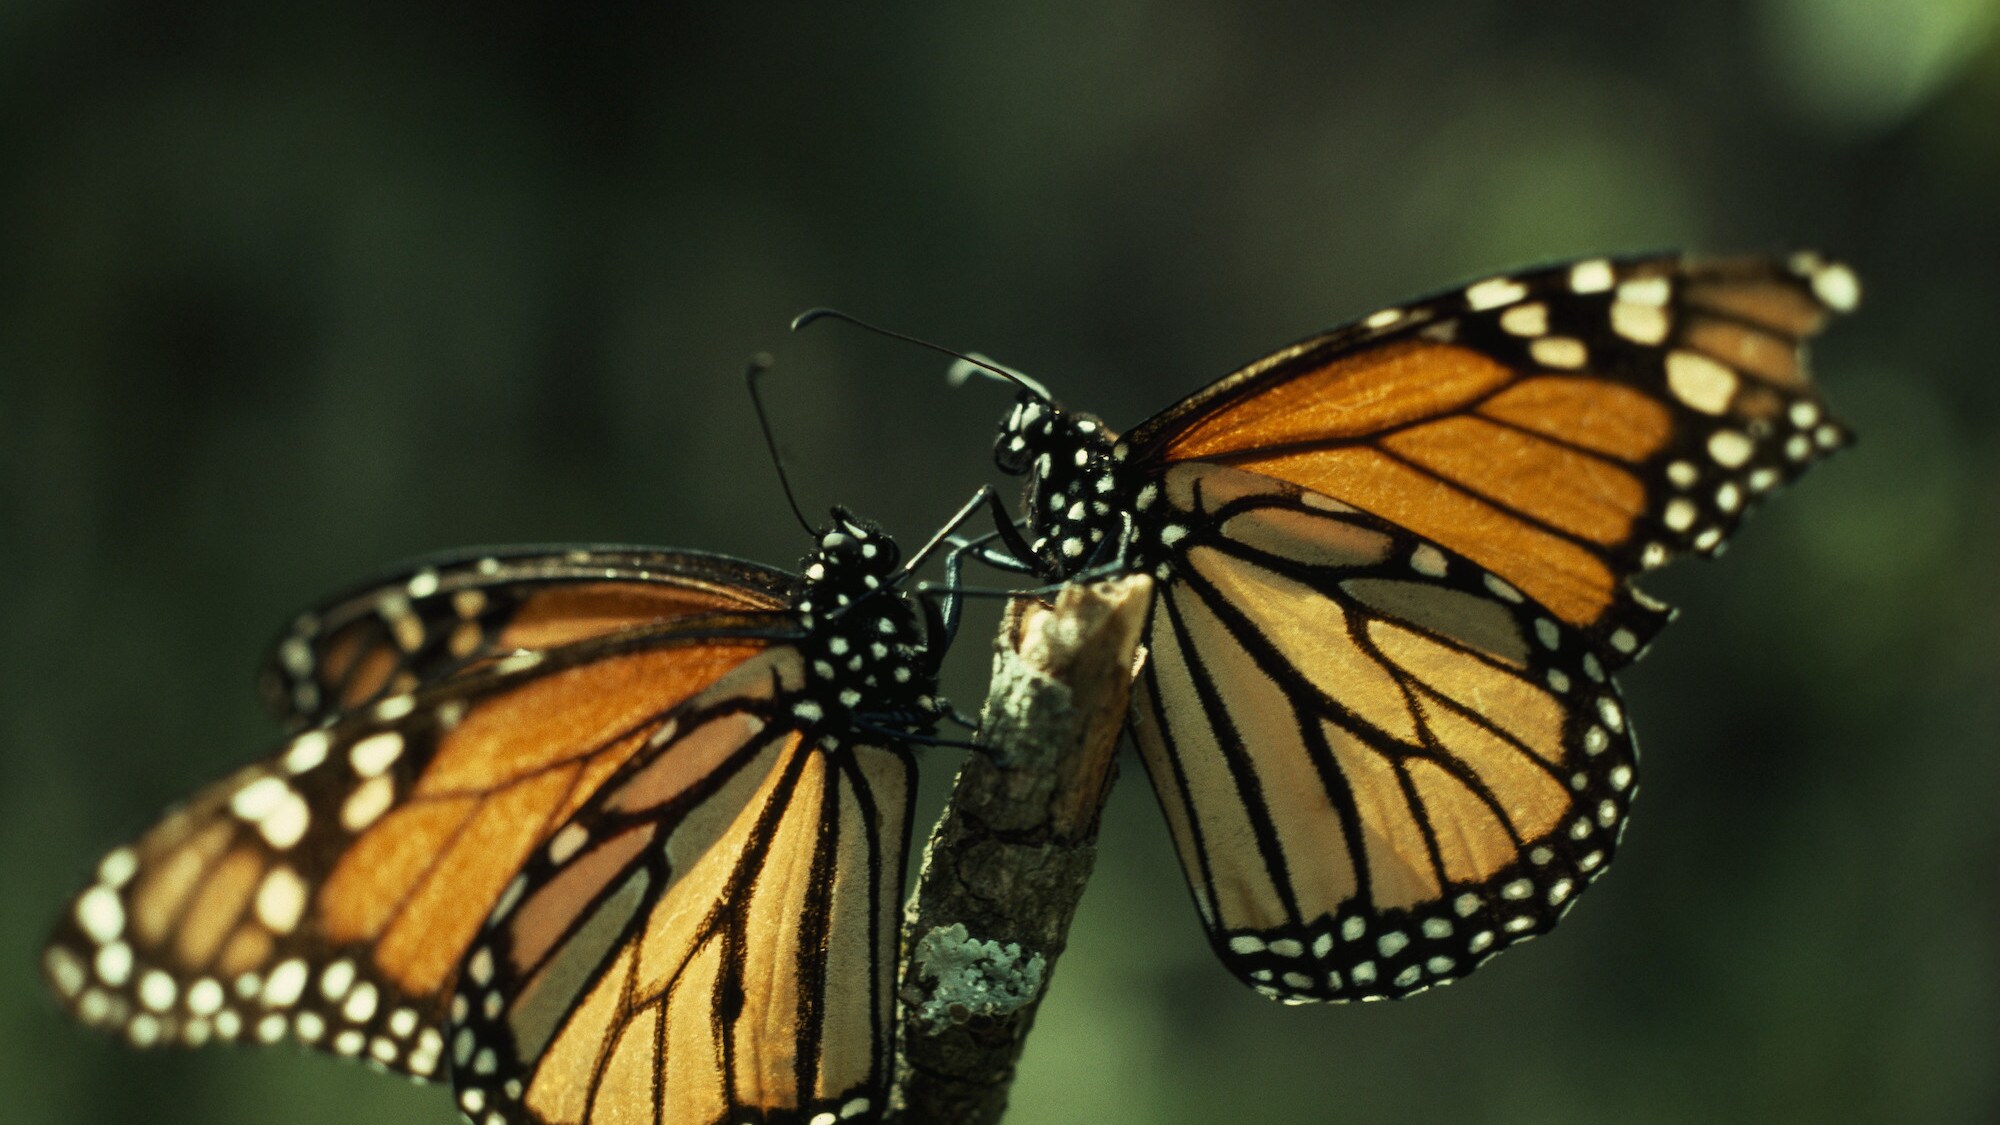 Monarch butterflies arrive in their winter home after migrating. Monarchs are featured in the "Braving the Backyard" episode of "A Real Bug's Life." (National Geographic Image Collection/Bianca Lavies)